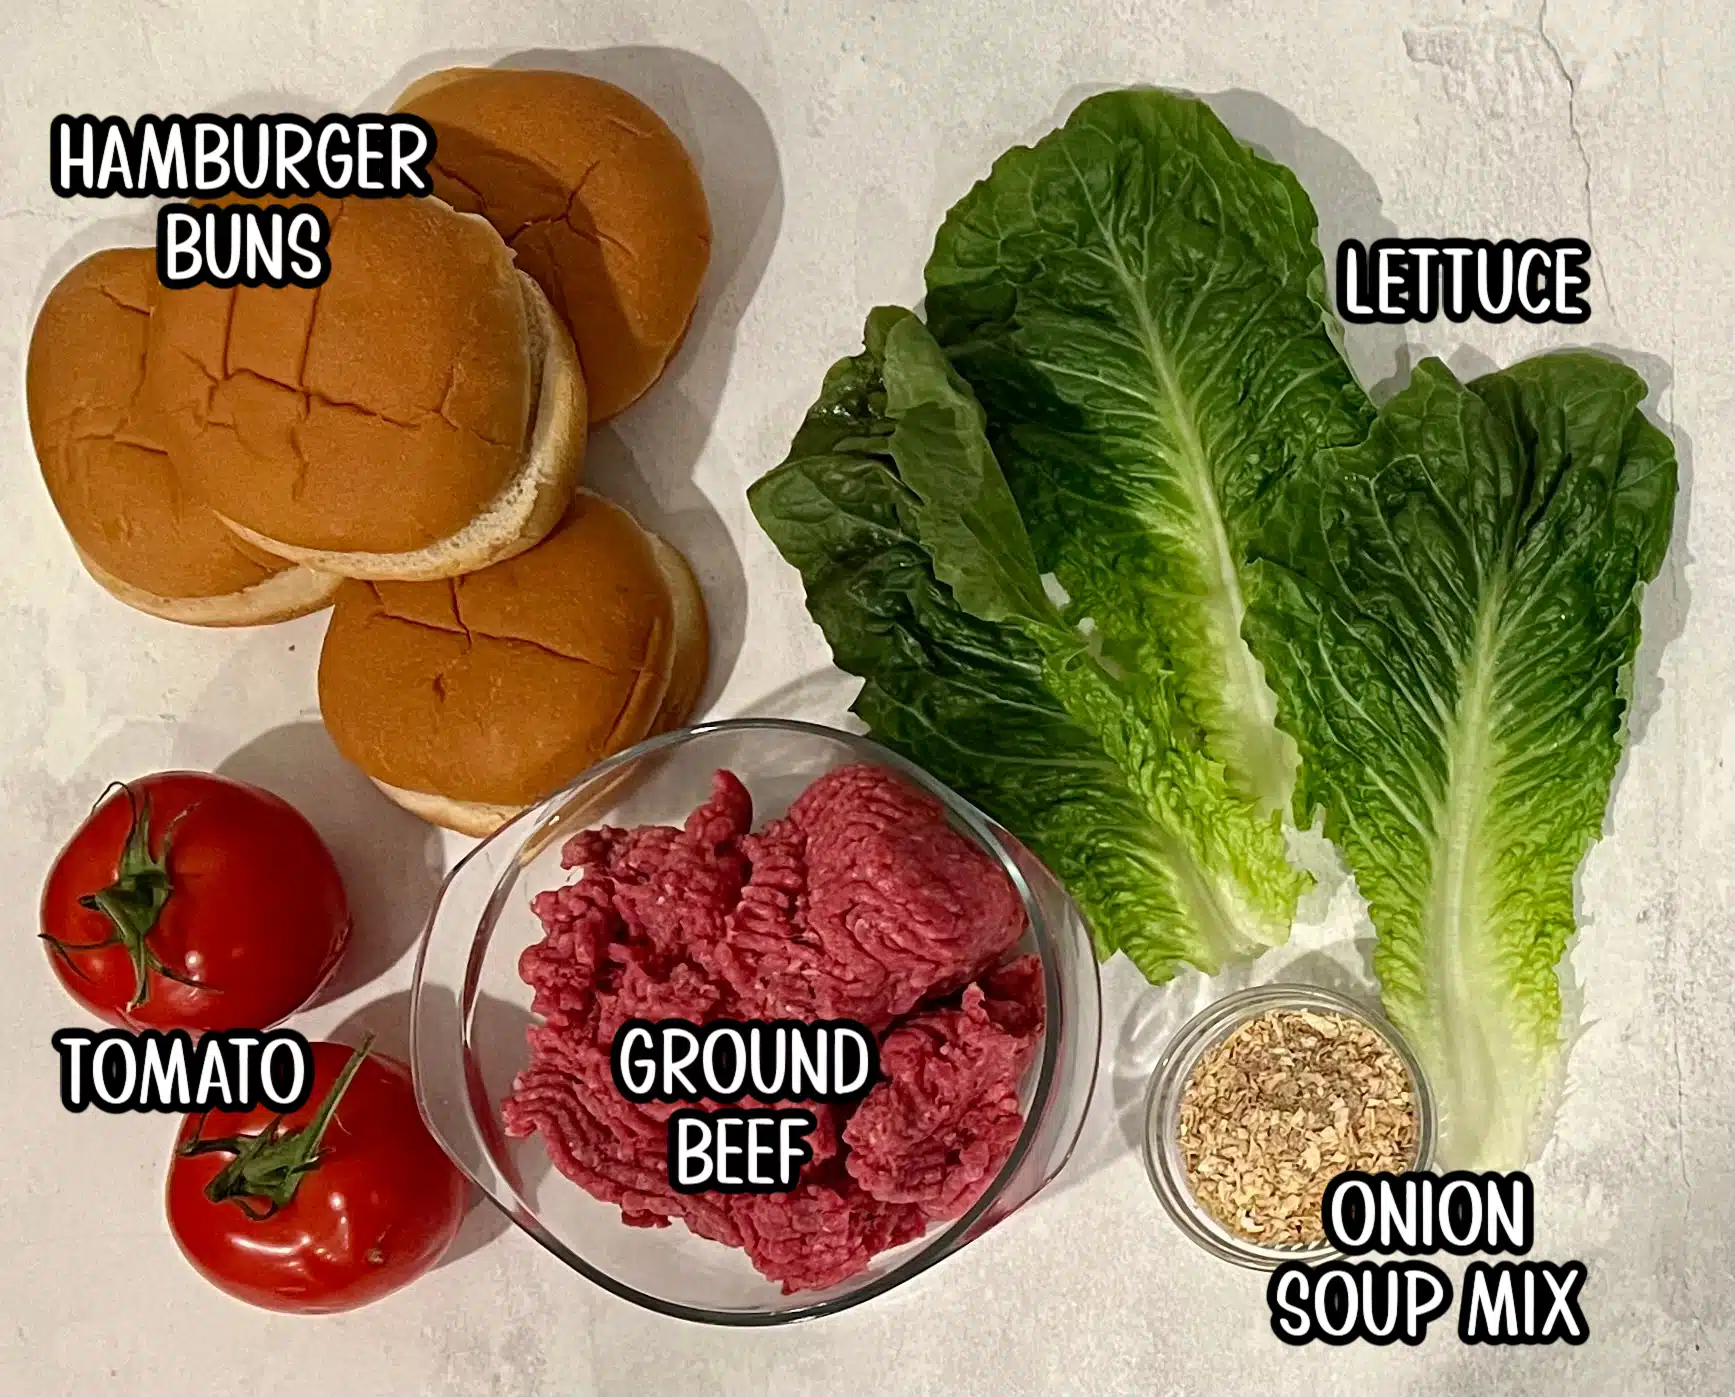 ingredients for homemade hamburgers